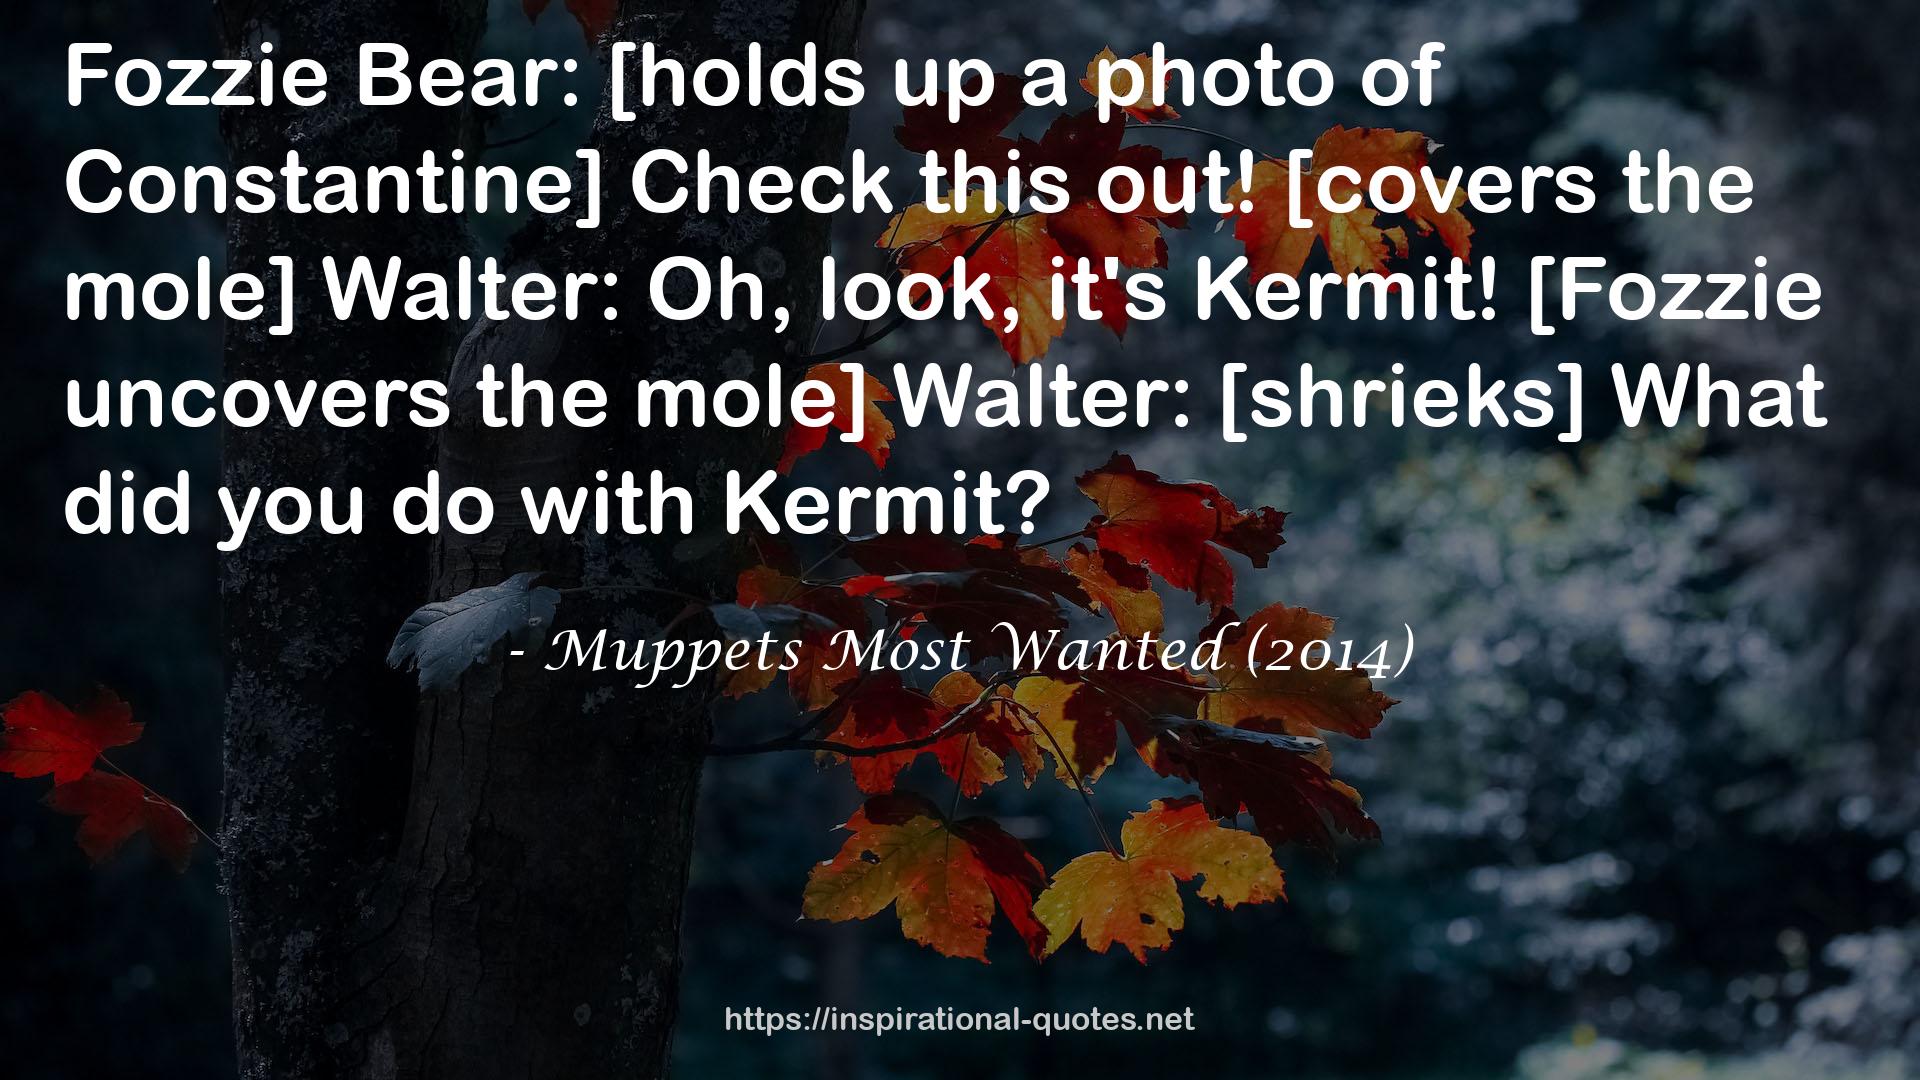 Muppets Most Wanted (2014) QUOTES